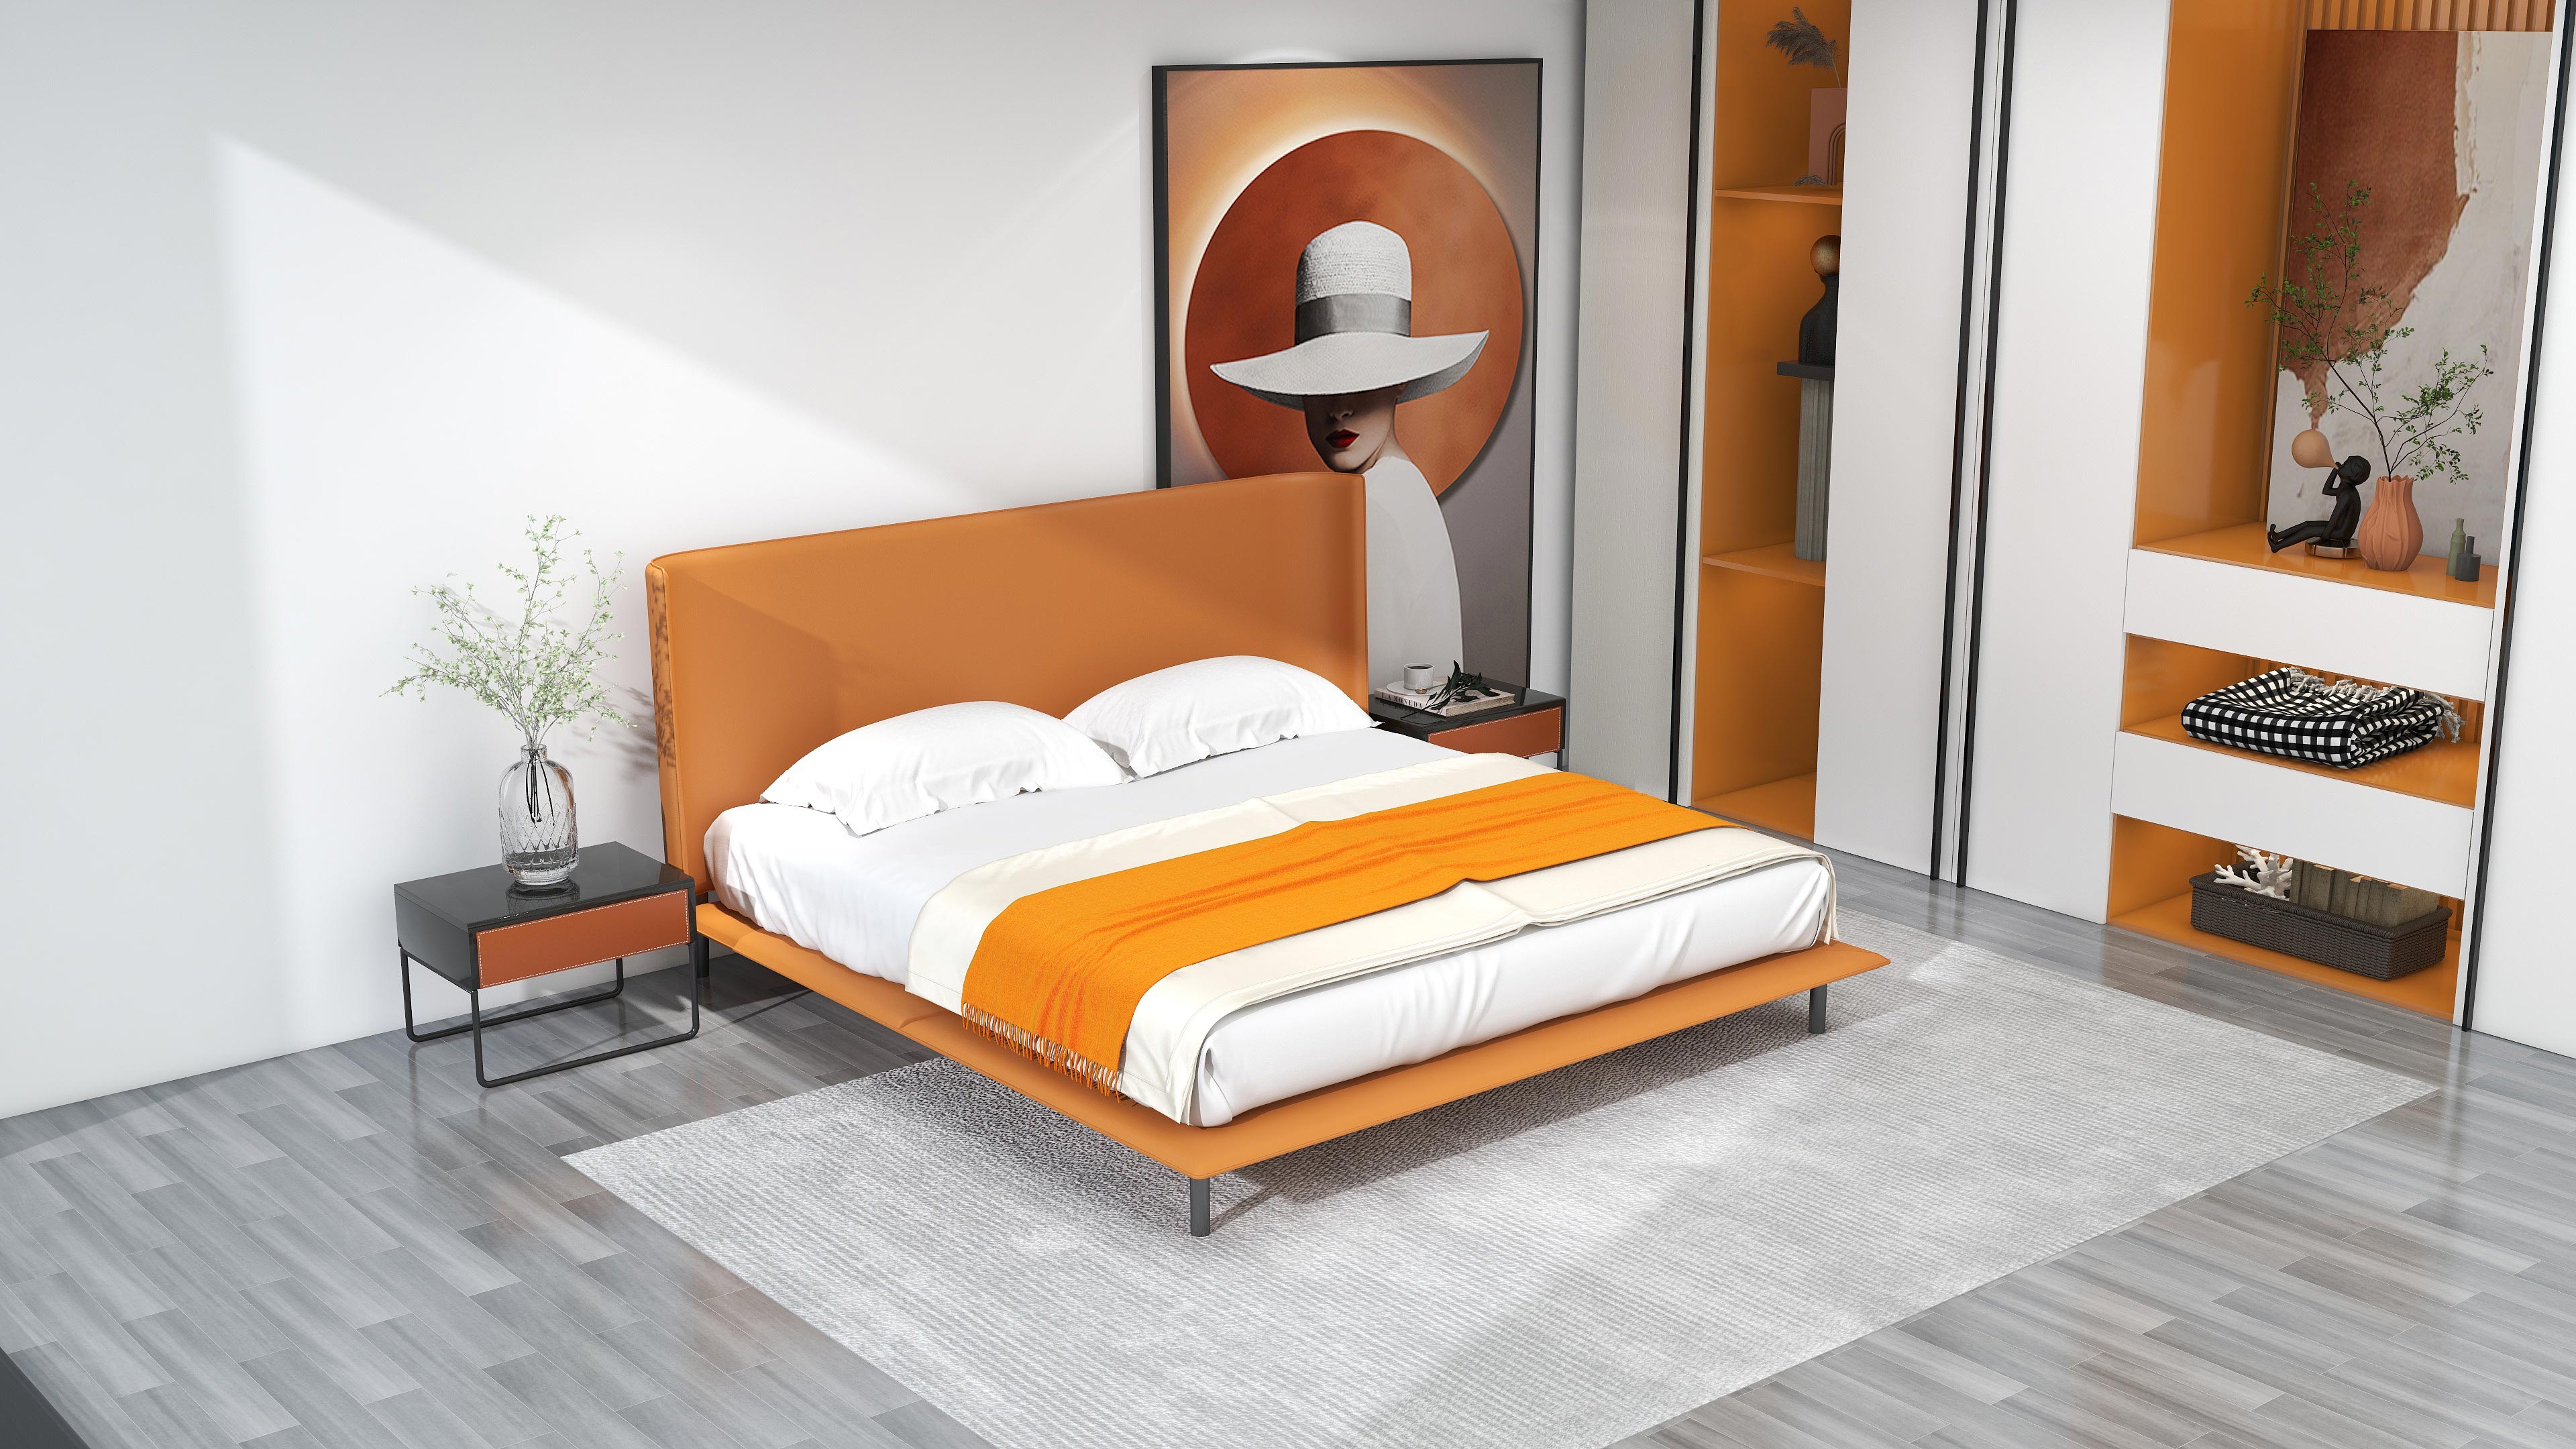 <p><strong>description：</strong></p><p>*bedframe with the 3D slats or motion</p><p>*the separate adjustable headrest can support your body perfectly</p><p>*the design of widen bedside makes the bed look different.</p><p>*Well matched the mattress and bedding.</p><p><br/></p>